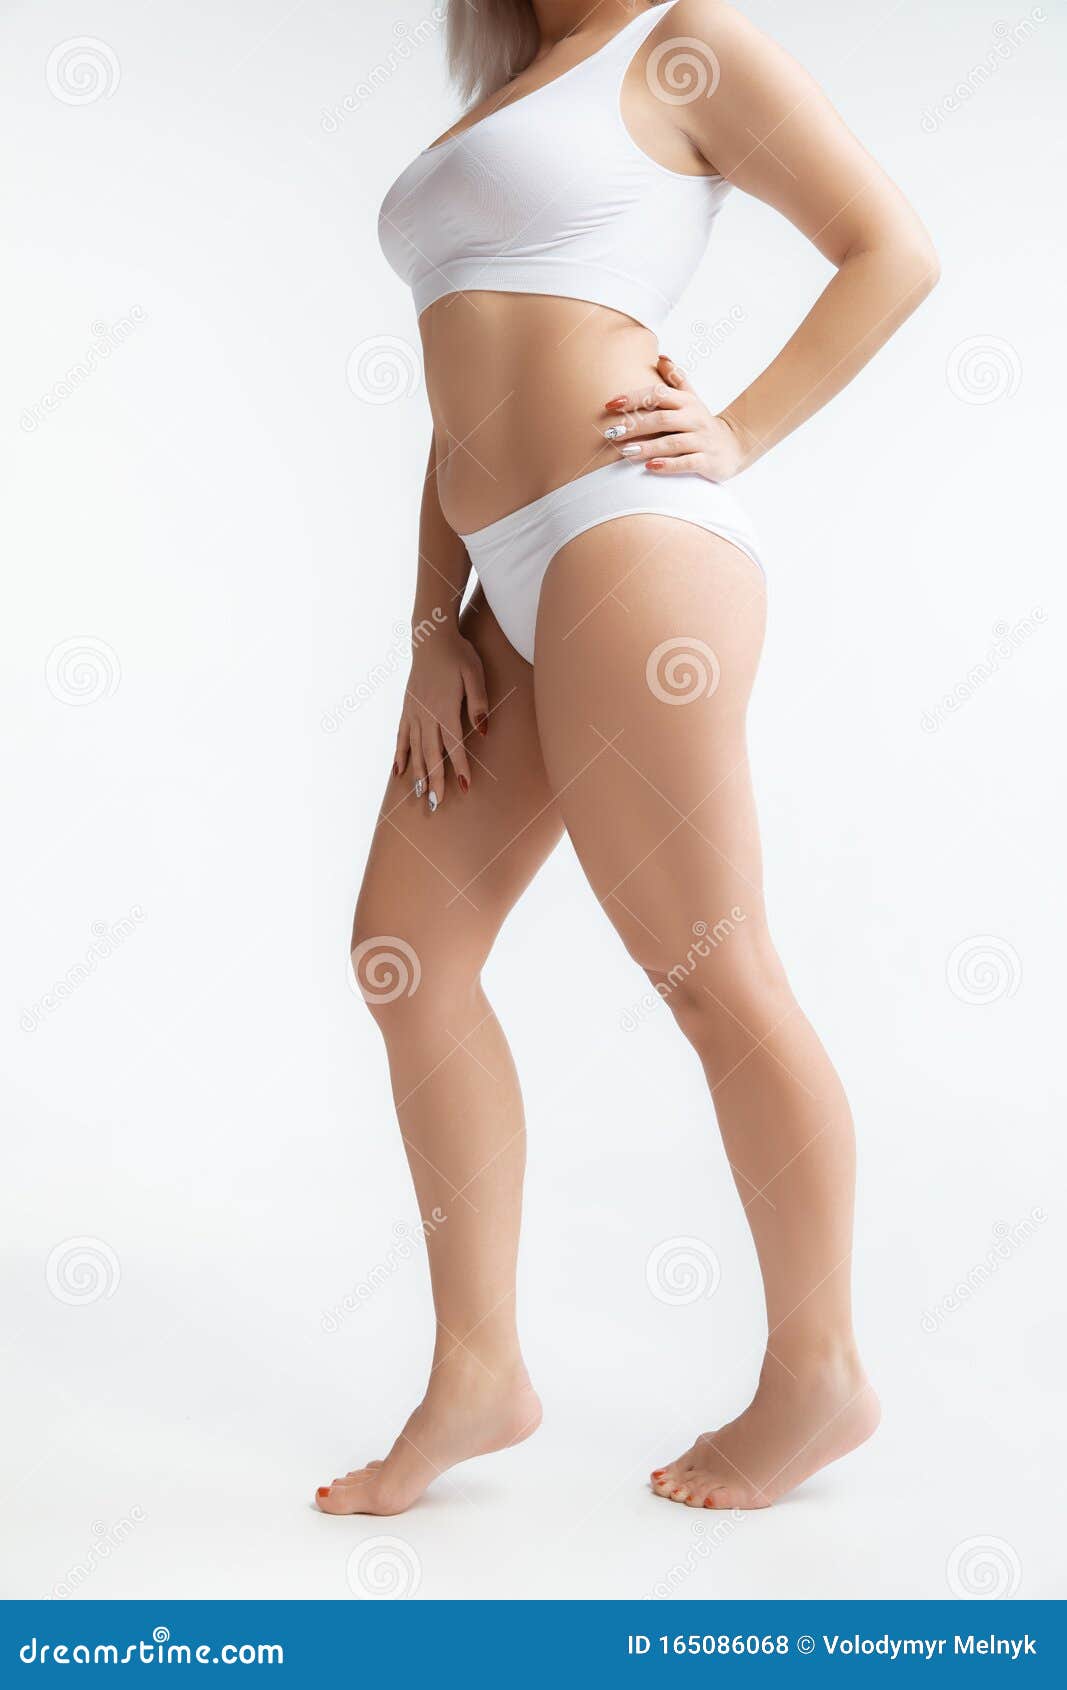 https://thumbs.dreamstime.com/z/beautiful-female-body-underwear-isolated-white-background-concept-bodycare-lifting-correction-surgery-beauty-165086068.jpg